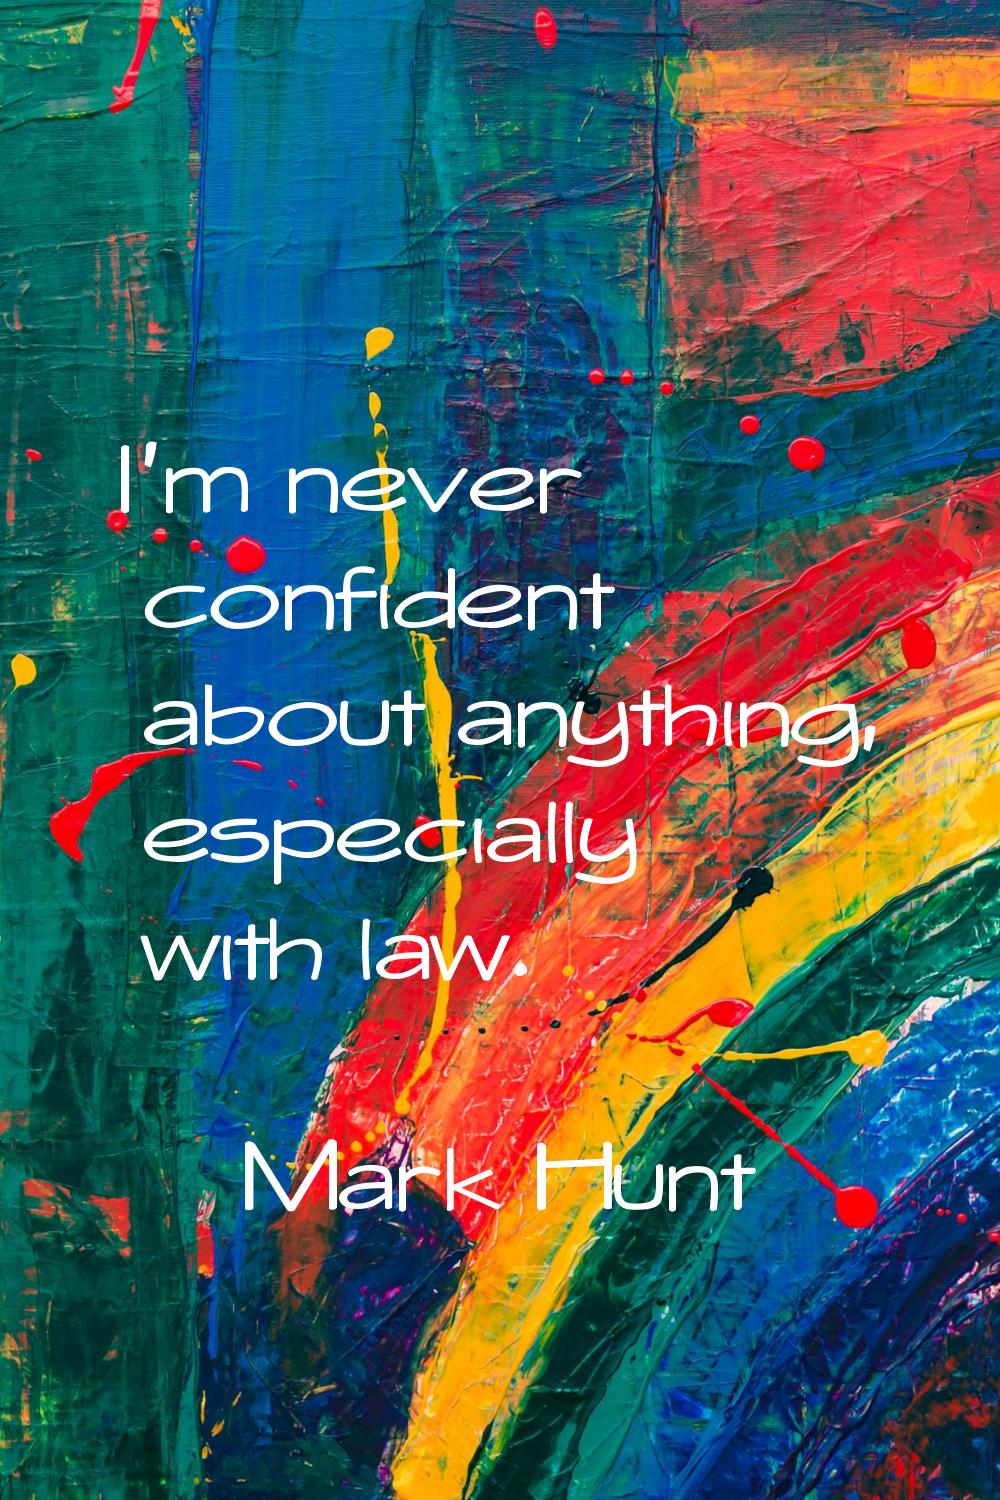 I'm never confident about anything, especially with law.